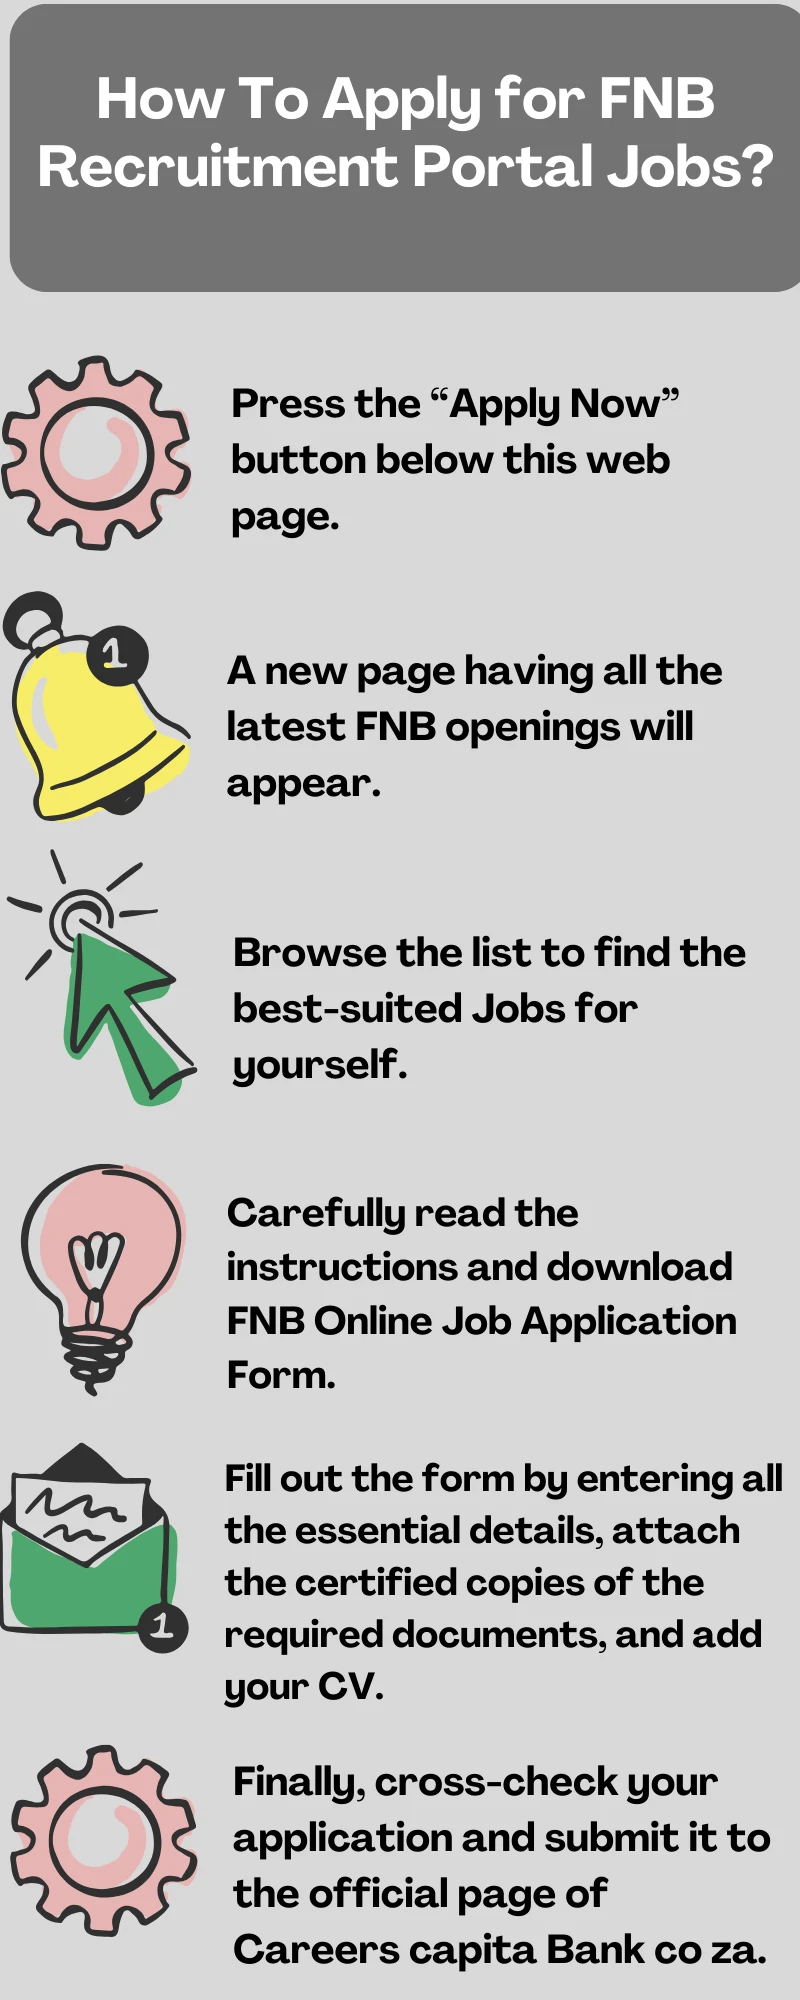 How To Apply for FNB Recruitment Portal Jobs?